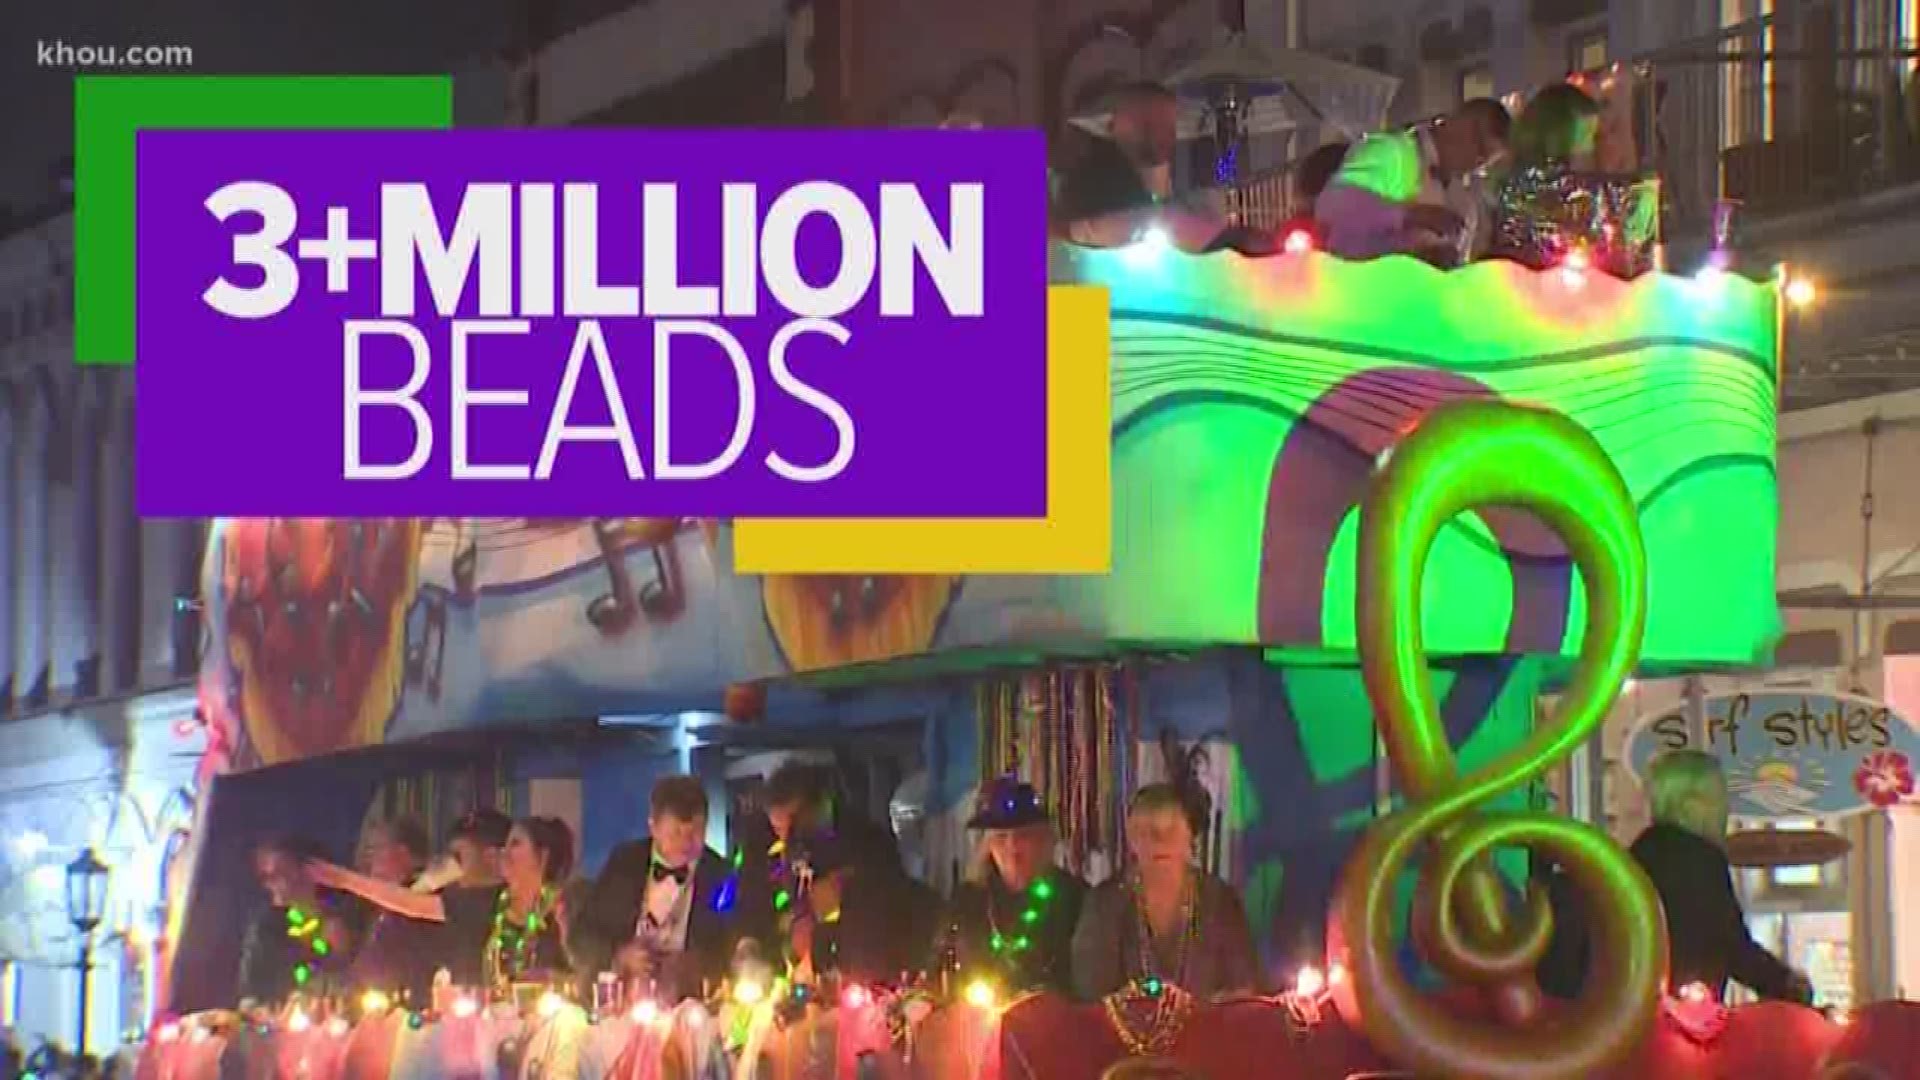 Mardi Gras attracts thousands of revelers and brings in big money for the island. Here’s a look at Mardi Gras by the numbers.